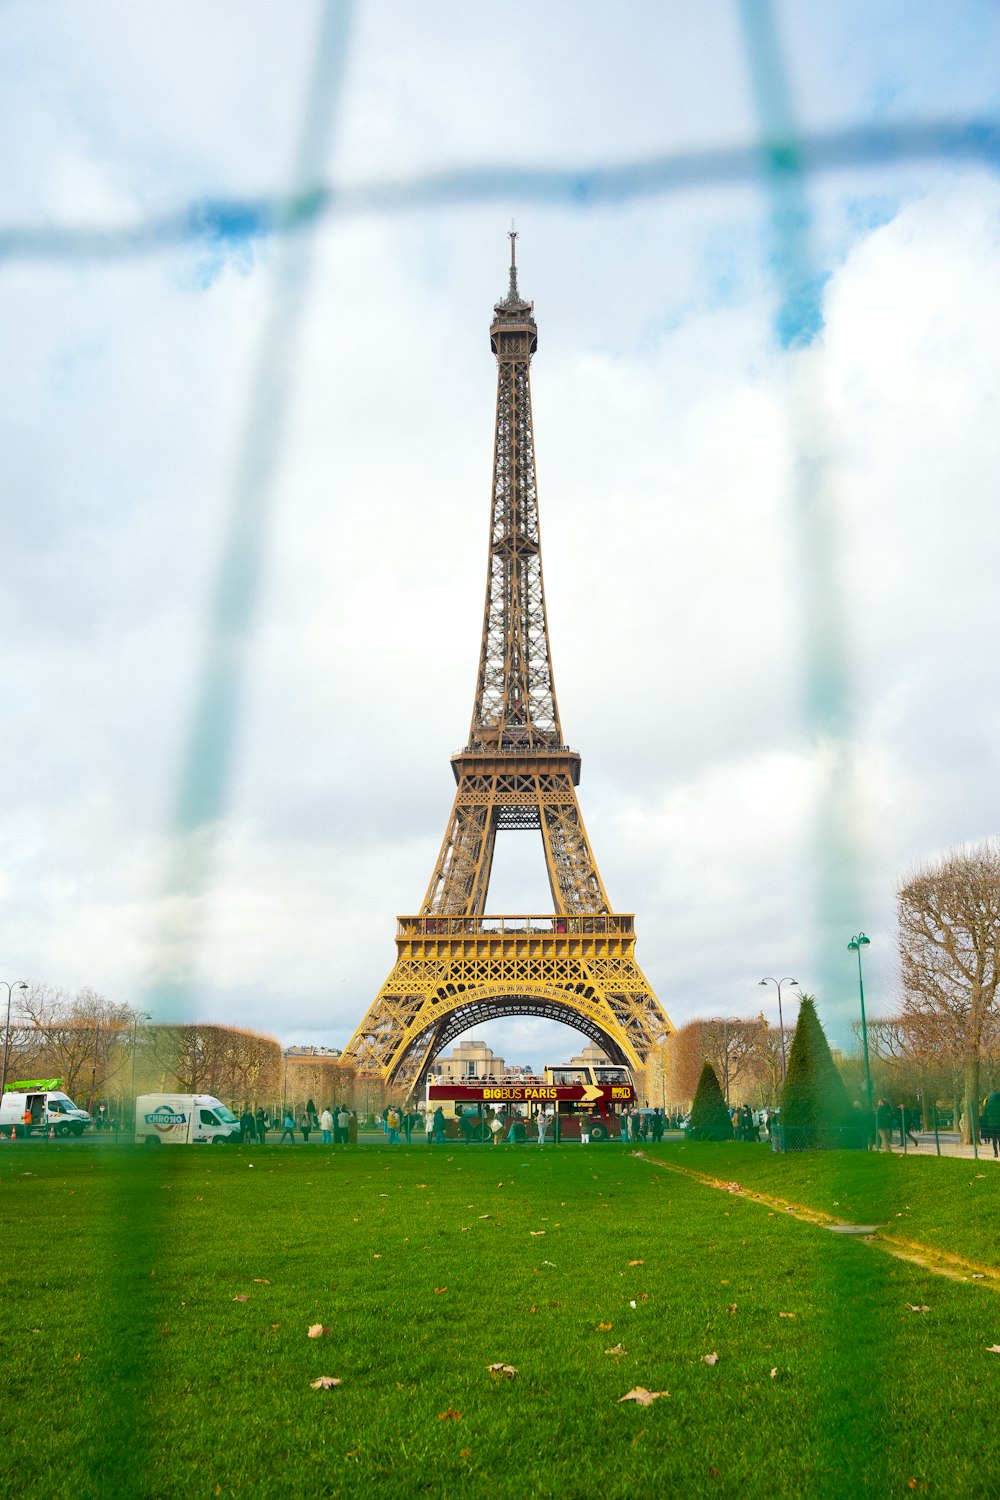 a view of the eiffel tower through a fence